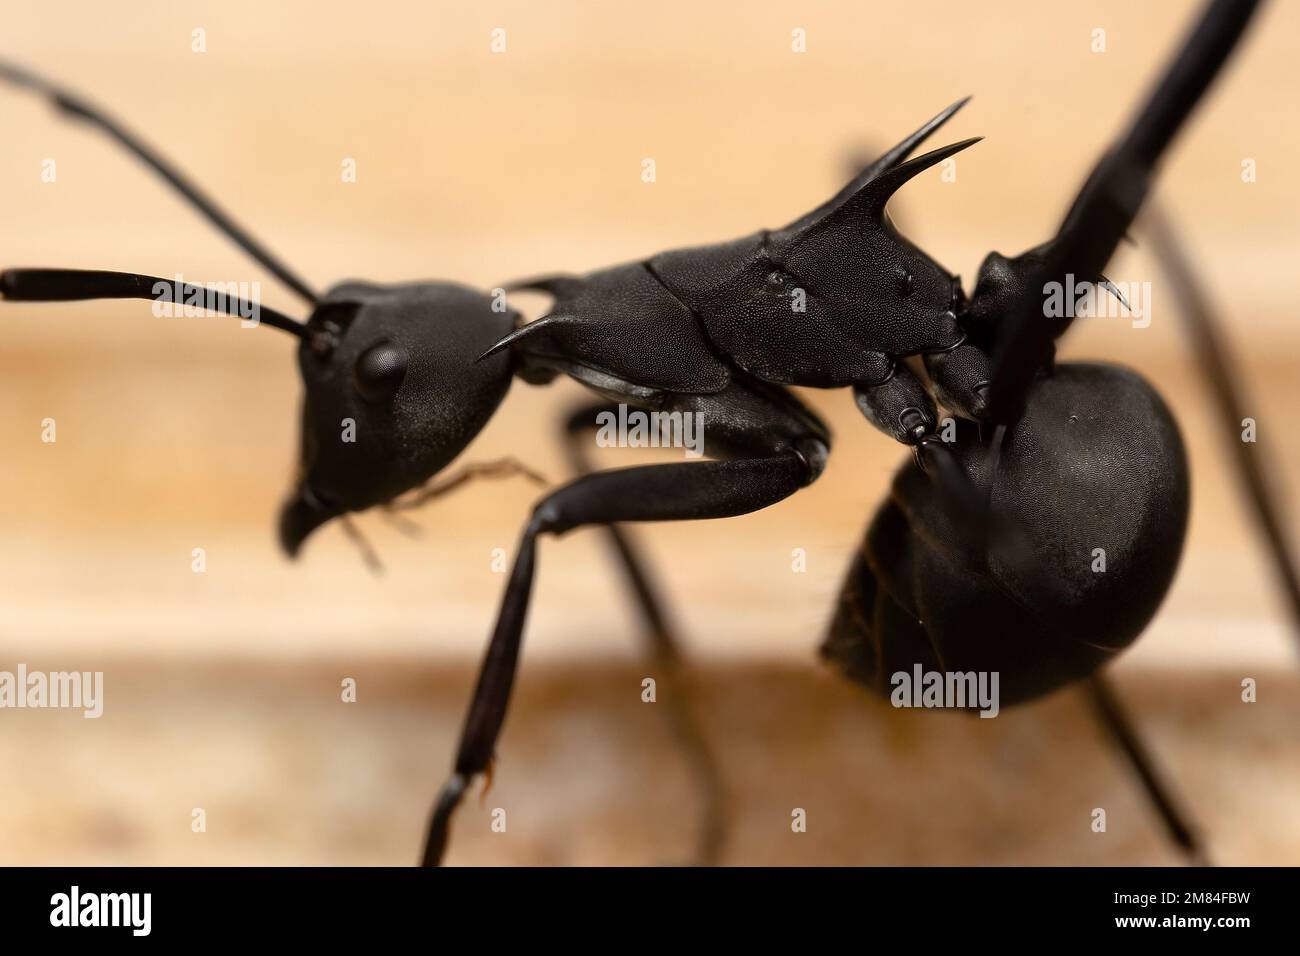 Macro photography of black ant on the floor, Selective focus at thorax. Stock Photo